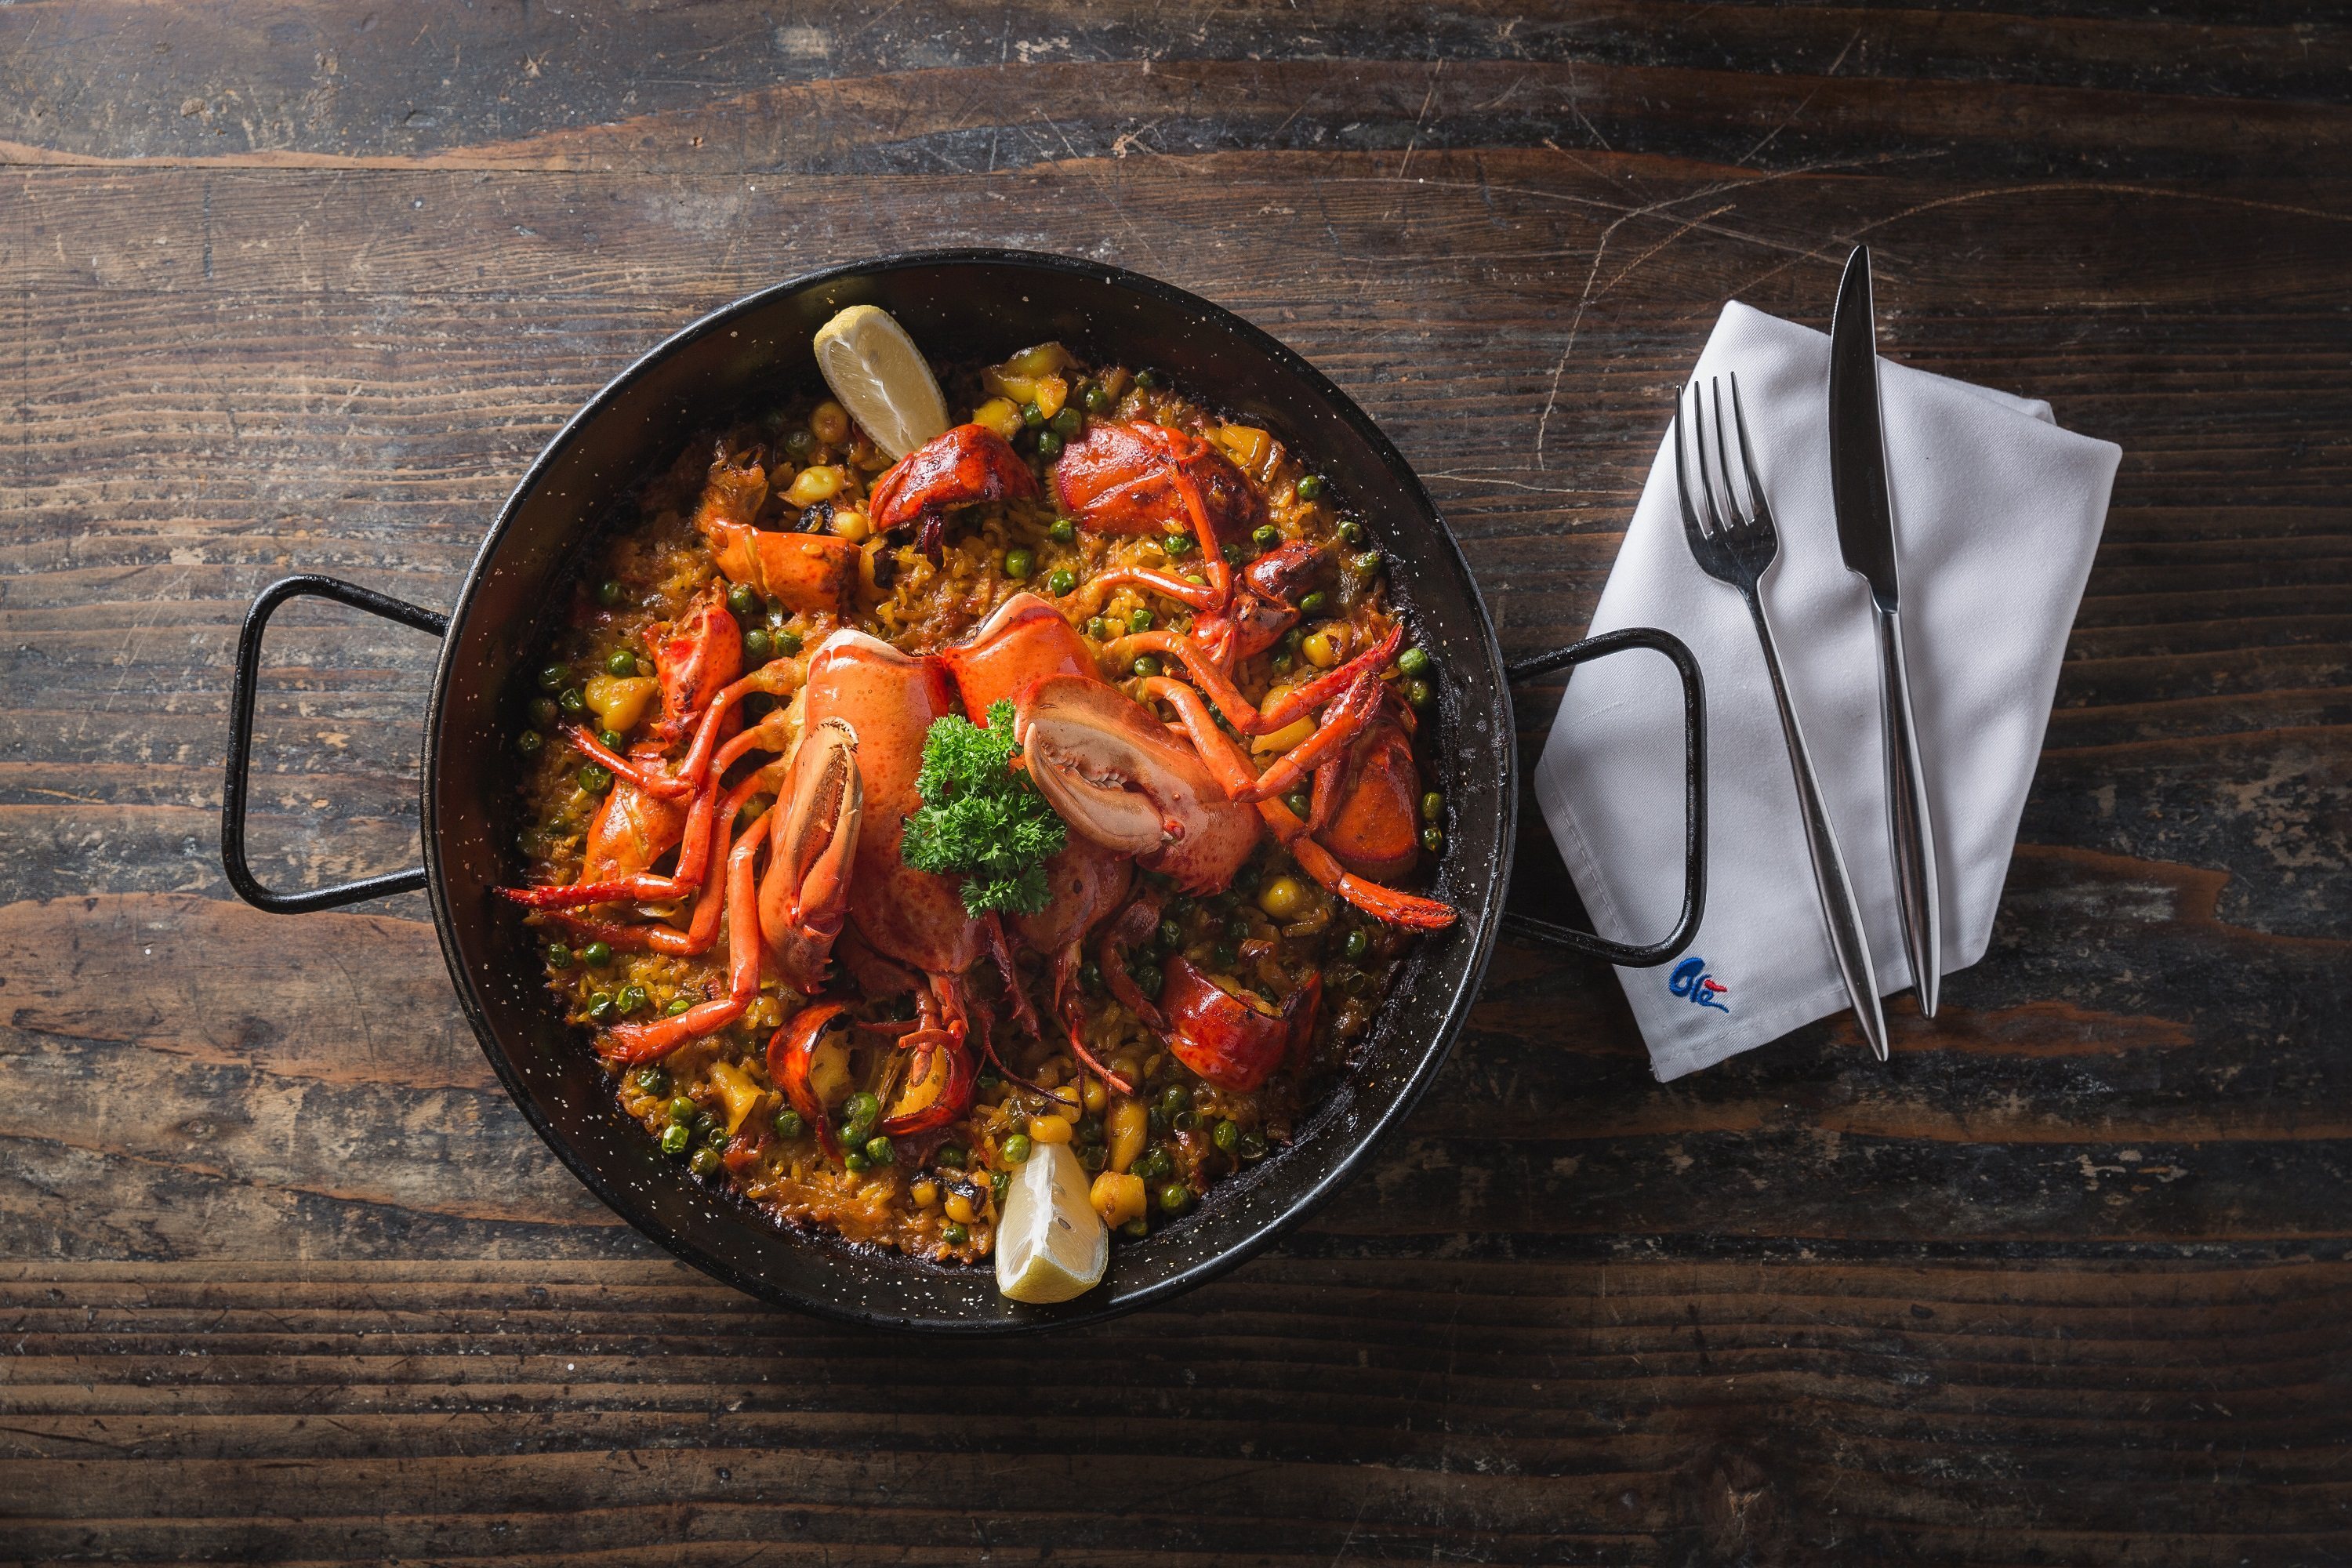 Treat your dad to a traditional Spanish paella at Olé, in Central, Hong Kong, this Father’s Day. Photo: Olé